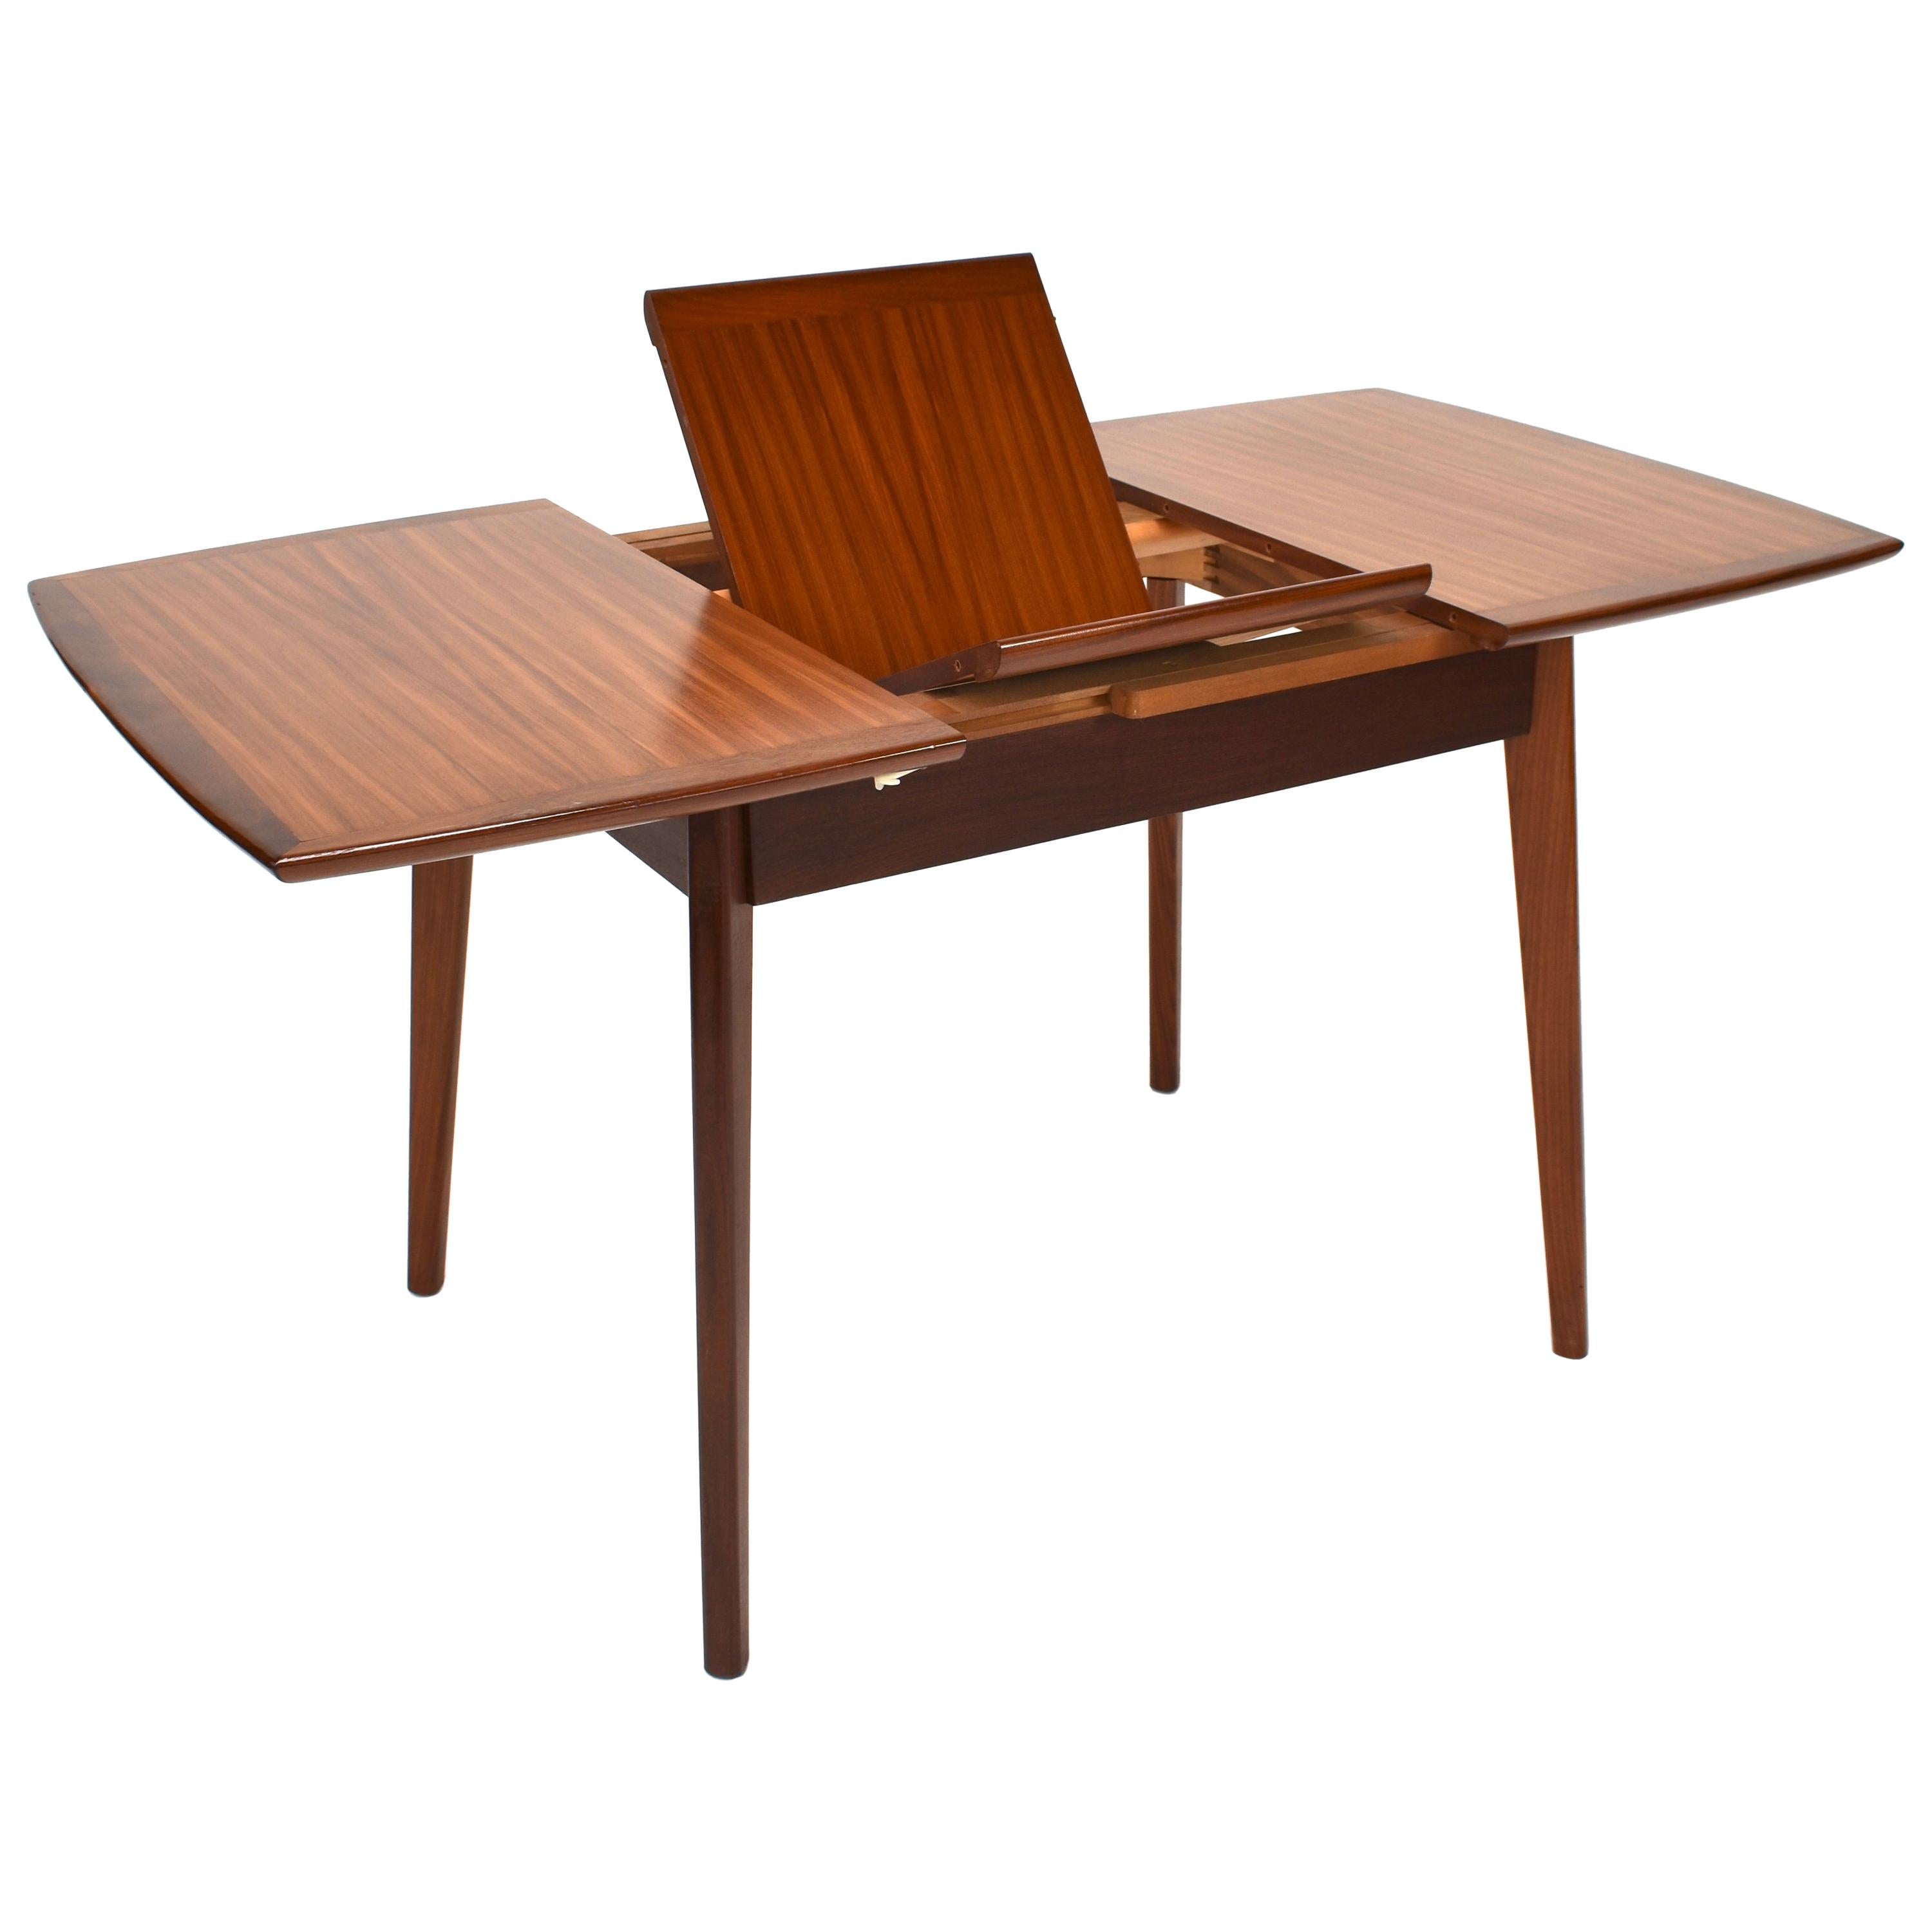 Teak fold-out dining table by Louis van Teeffelen for WeBe, Netherlands, 1960s
Teak veneer top with solid teak edges and legs.
In very good condition.
Legs can be taken of.
Minor wear on one edge (see picture)
Size in cm:
Measures: W. 100